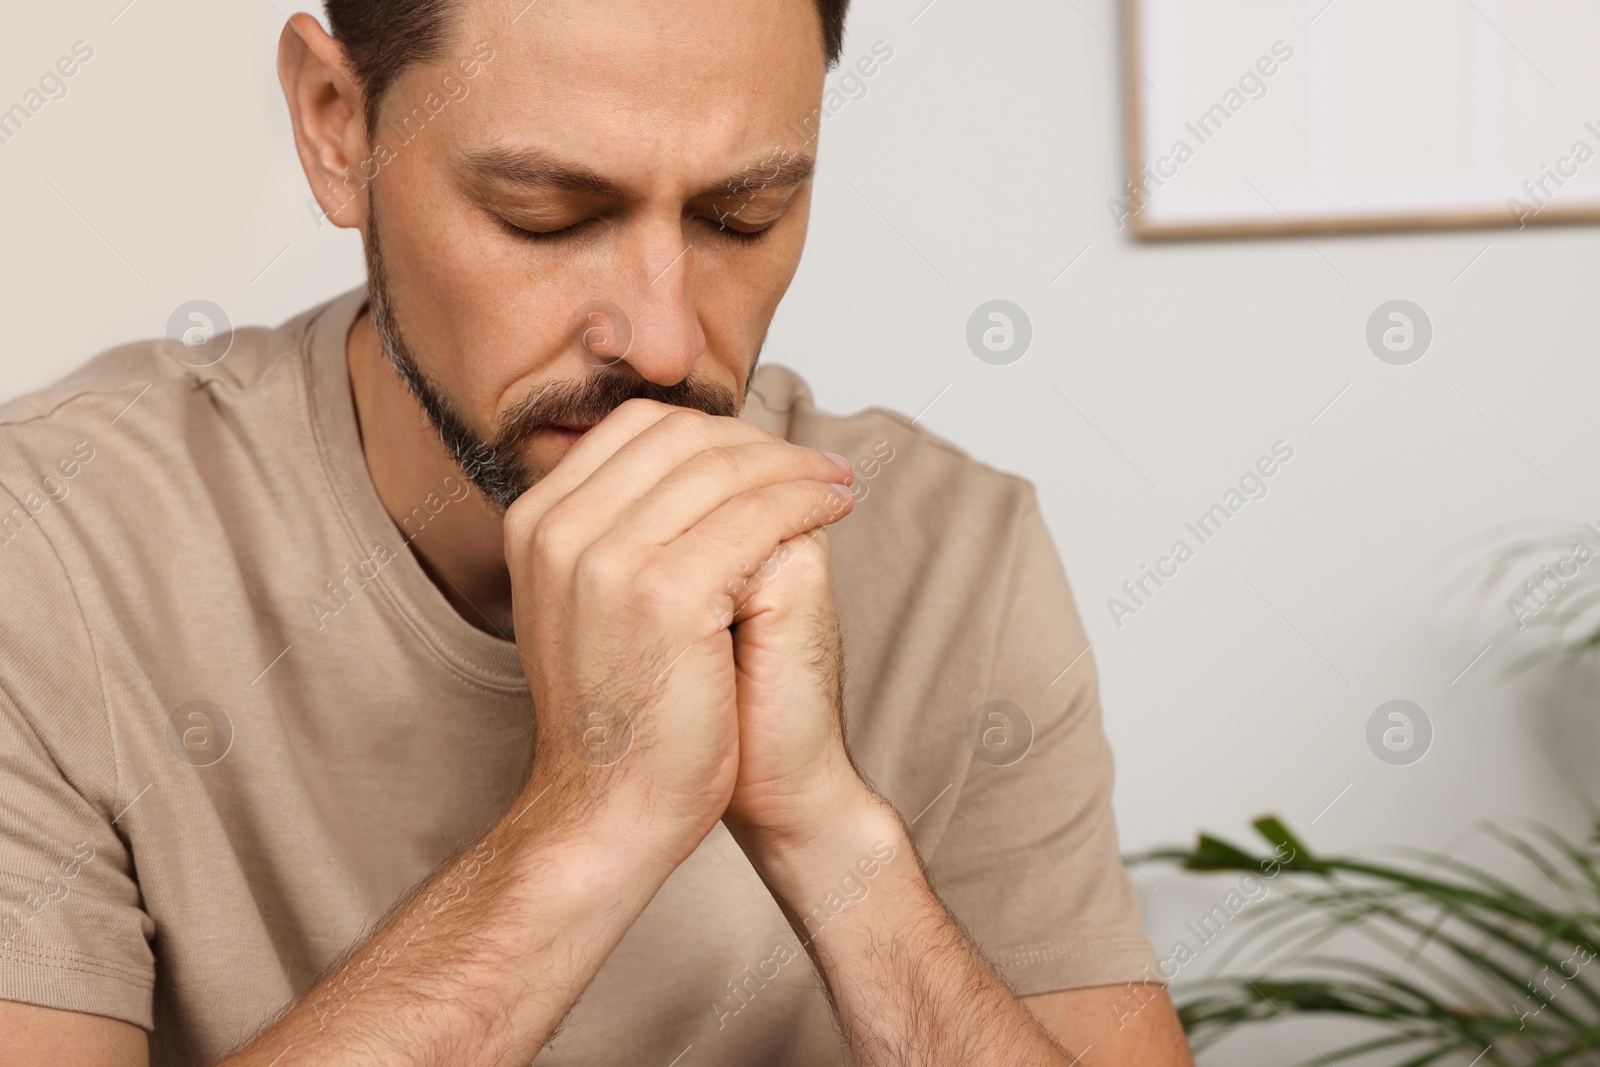 Photo of Man with clasped hands praying in room at home, closeup